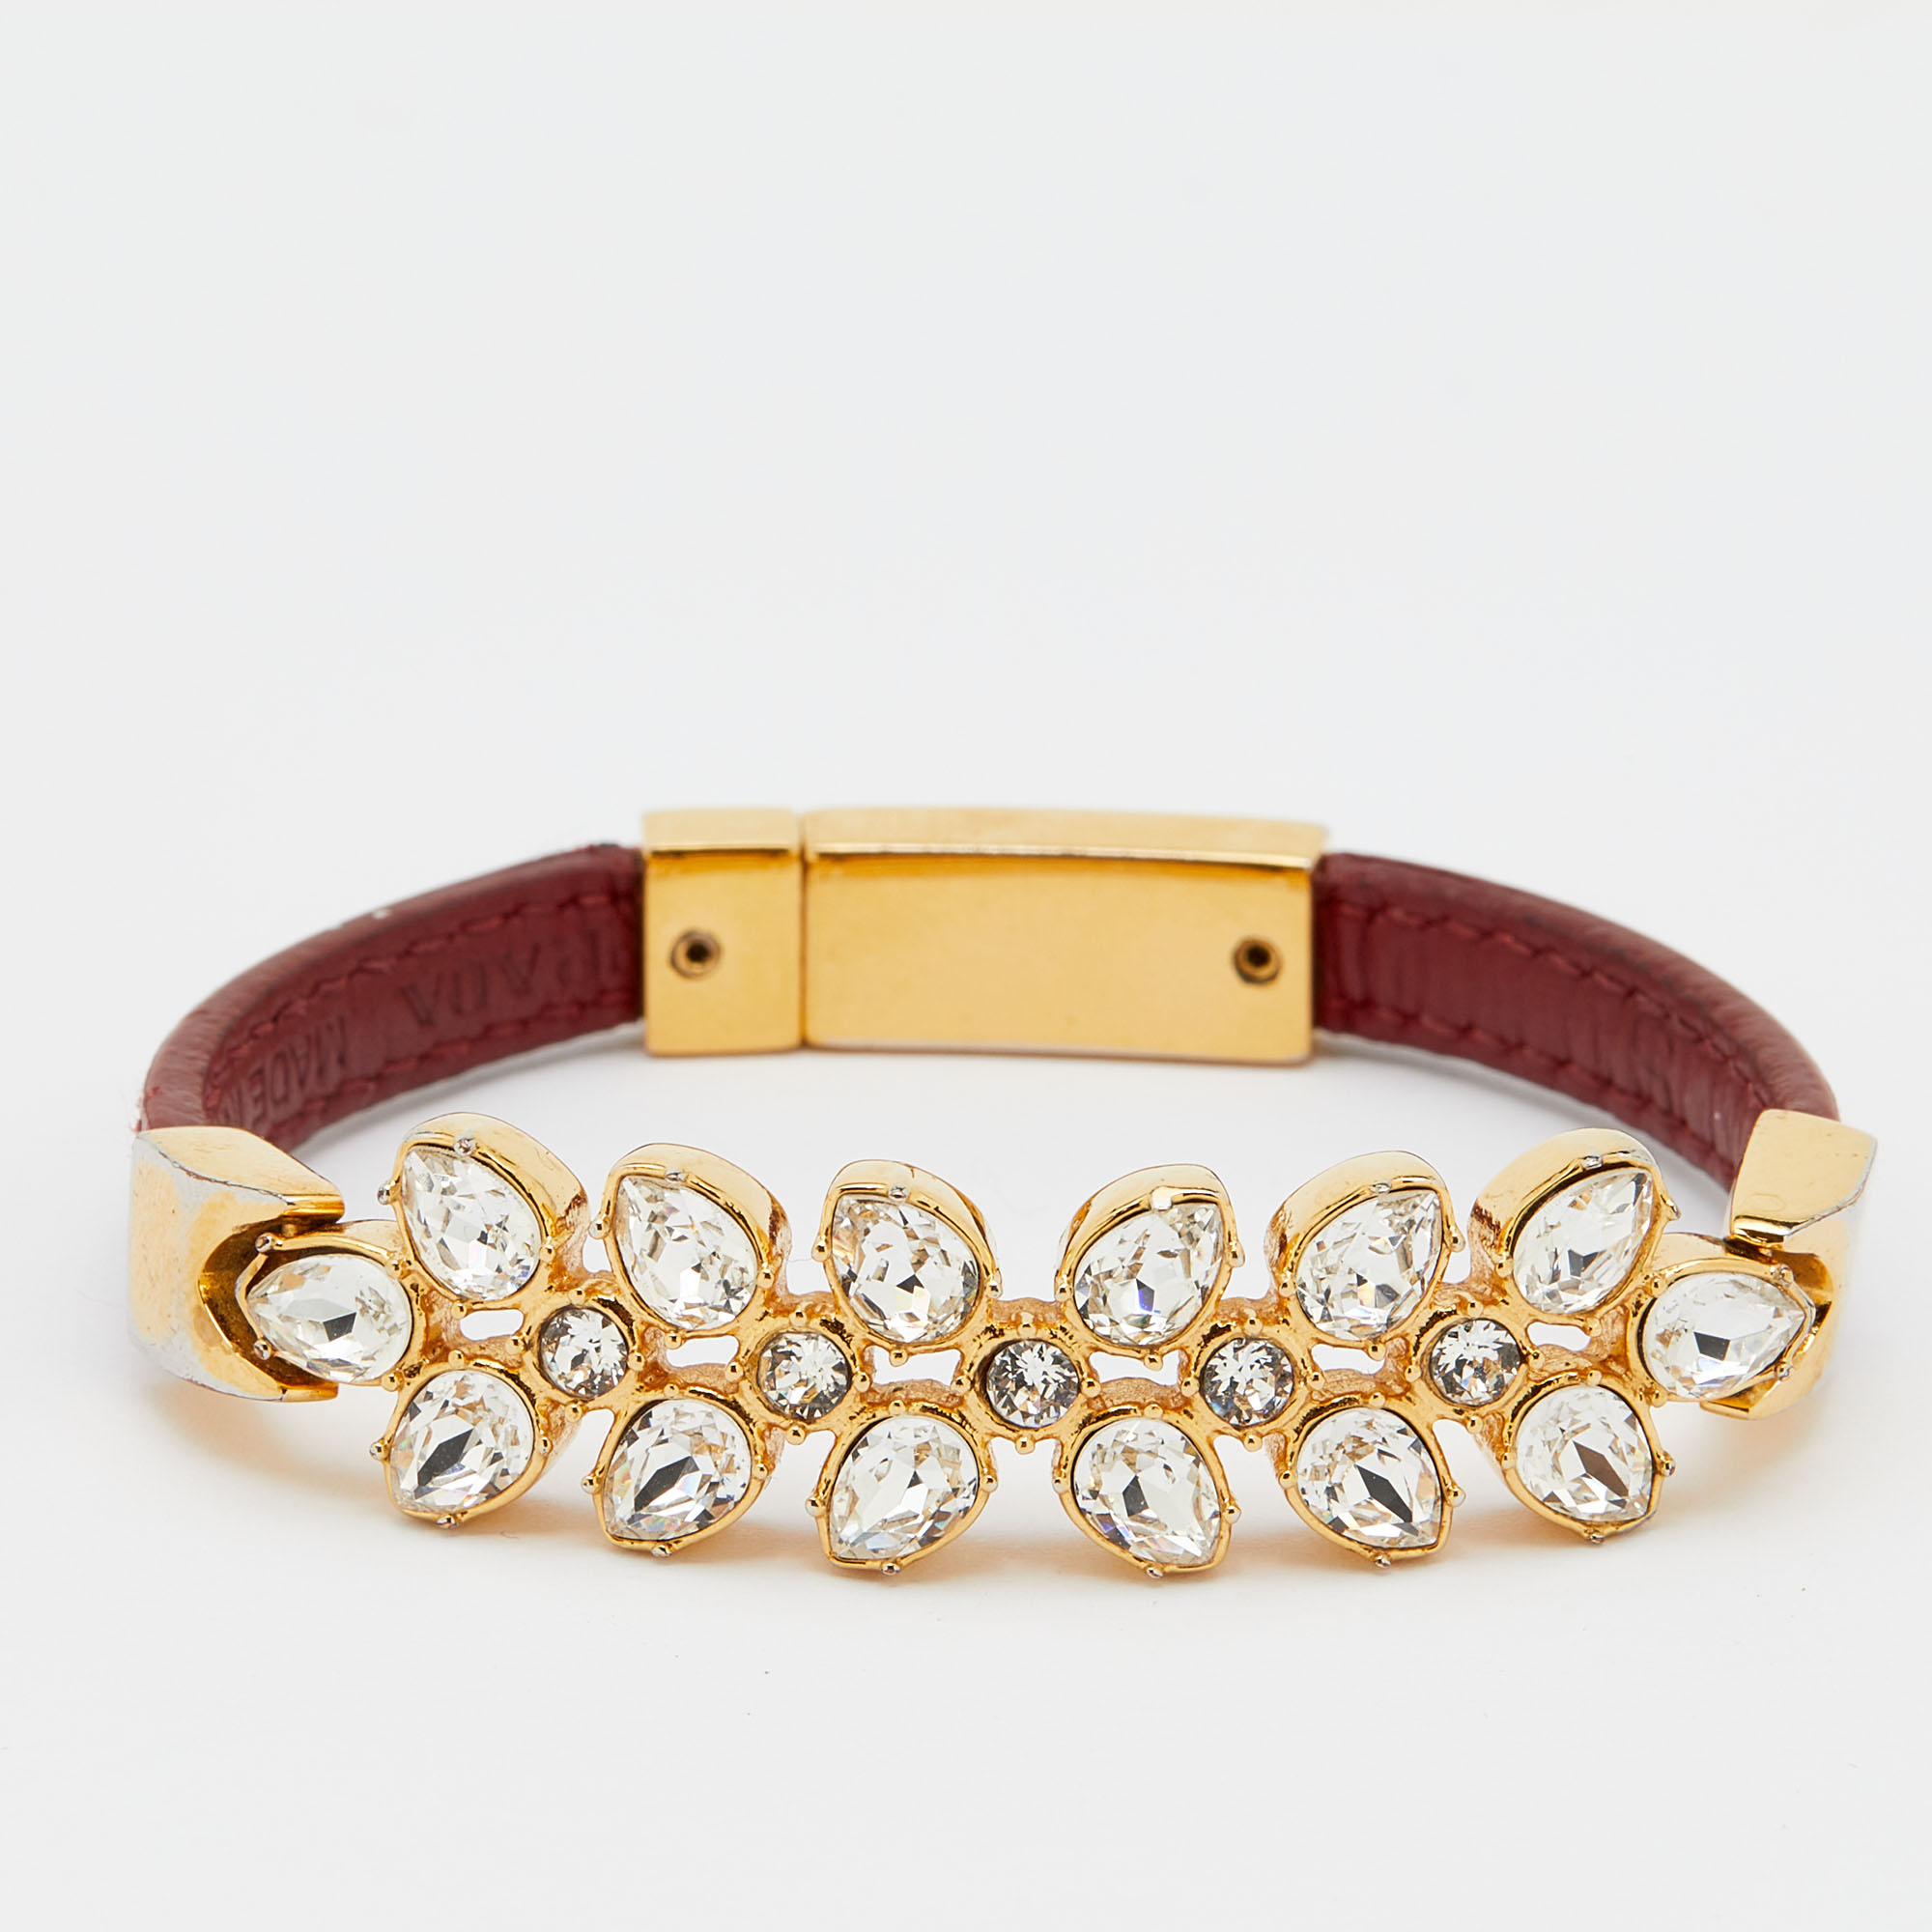 Prada Chic Crystals Red Leather Gold Tone Bracelet S